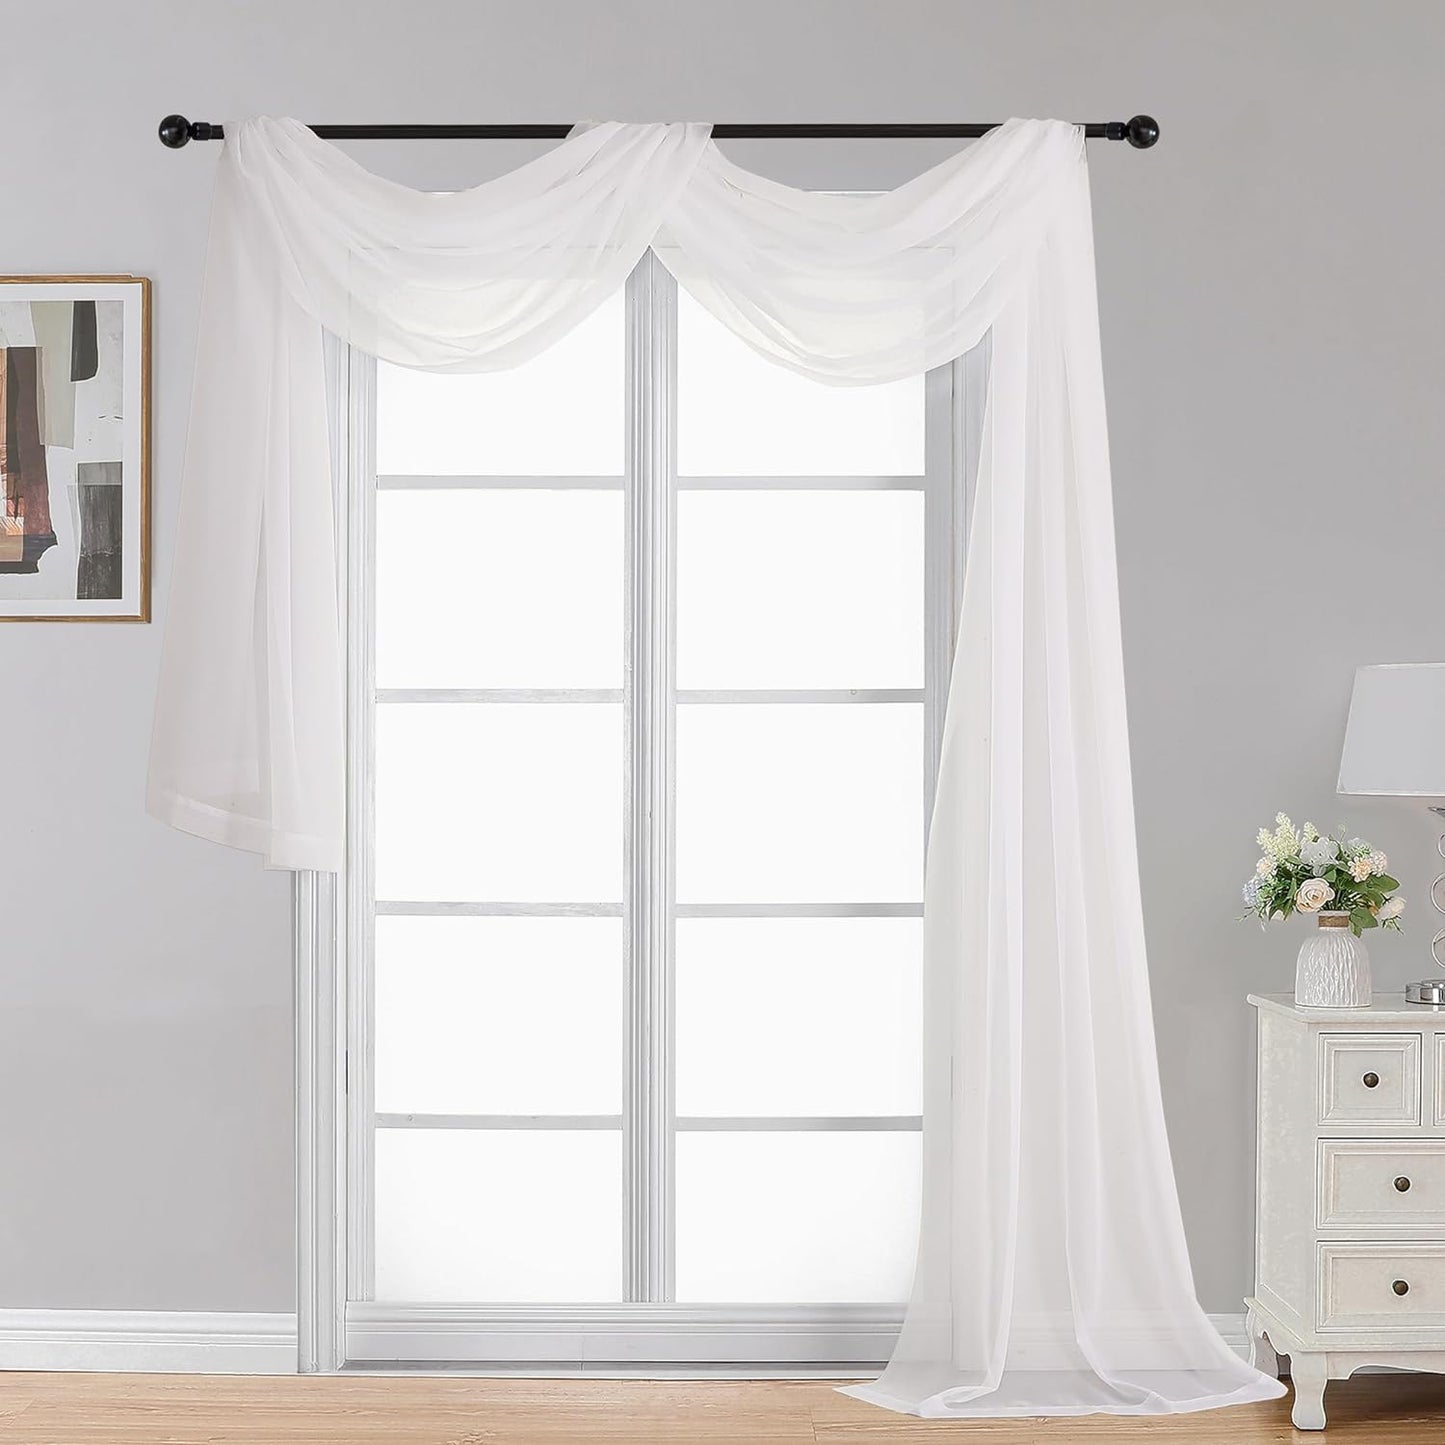 OWENIE White Sheer Valance for Window, Small Short Rod Pocket Voile Valance Curtain Window Treatment Decor for Living Room Bathroom Kitchen Cafe Laundry Basement, 60" W X 14" L  OWENIE Ivory 42W X 216L 